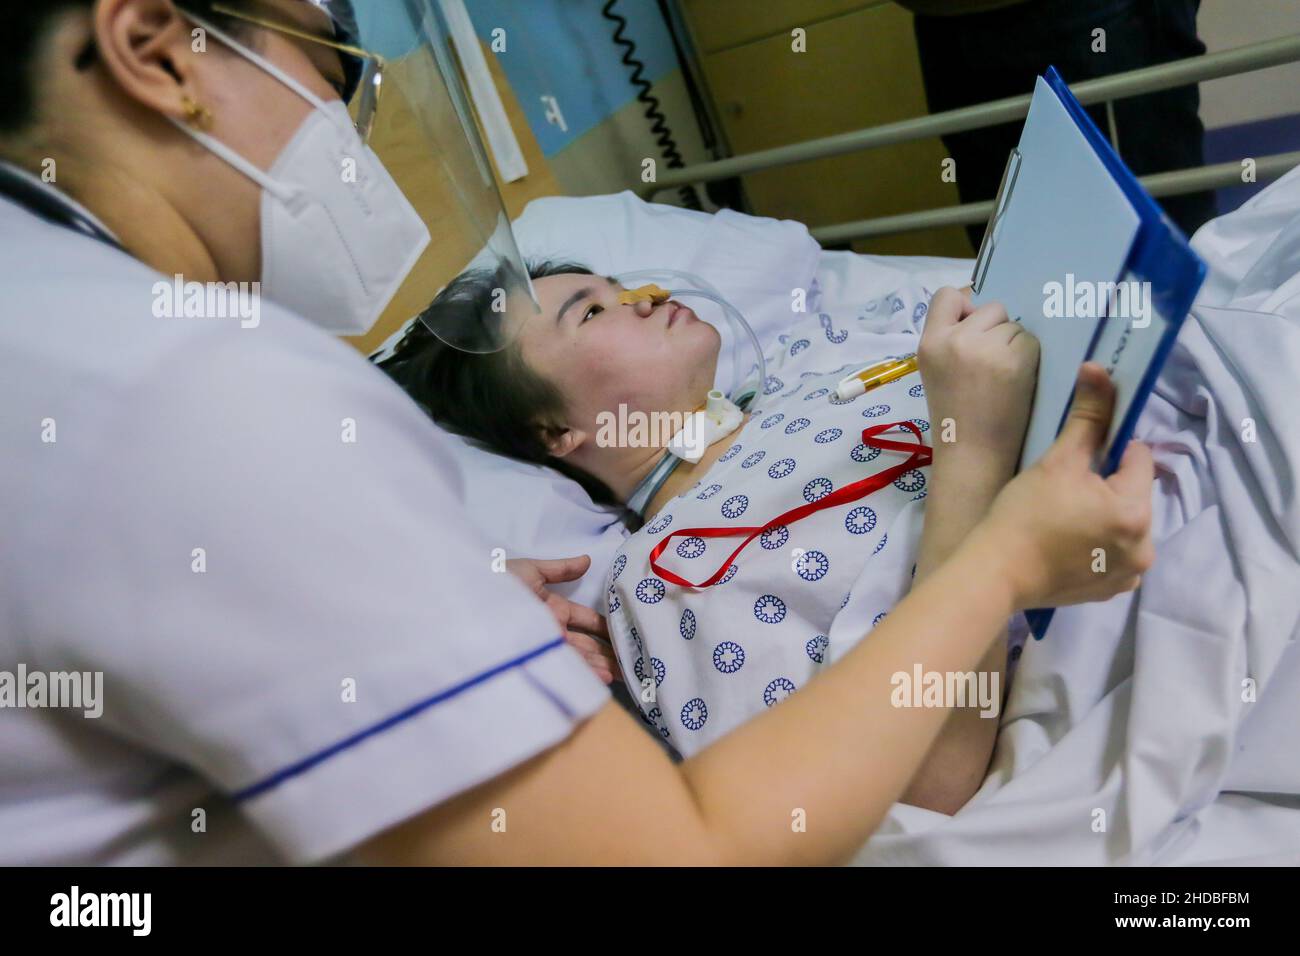 (220105) -- PASIG CITY, Jan. 5, 2022 (Xinhua) -- Li Jinxin, a 26-year-old Chinese woman, writes her name assisted by her nurse Sherricka Mae Navalta at the Medical City hospital in Pasig City, the Philippines, Dec. 13, 2021. Li Jinxin has found her dream of returning home come true after battling a devastating illness for almost two and a half years in the Philippines that nearly cost her life.   Li spent 904 days bedridden in Medical City due to a brain hemorrhage.    TO GO WITH 'Feature: With help of Filipino medics, once critically-ill Chinese woman gets back home' (Xinhua/Rouelle Umali) Stock Photo